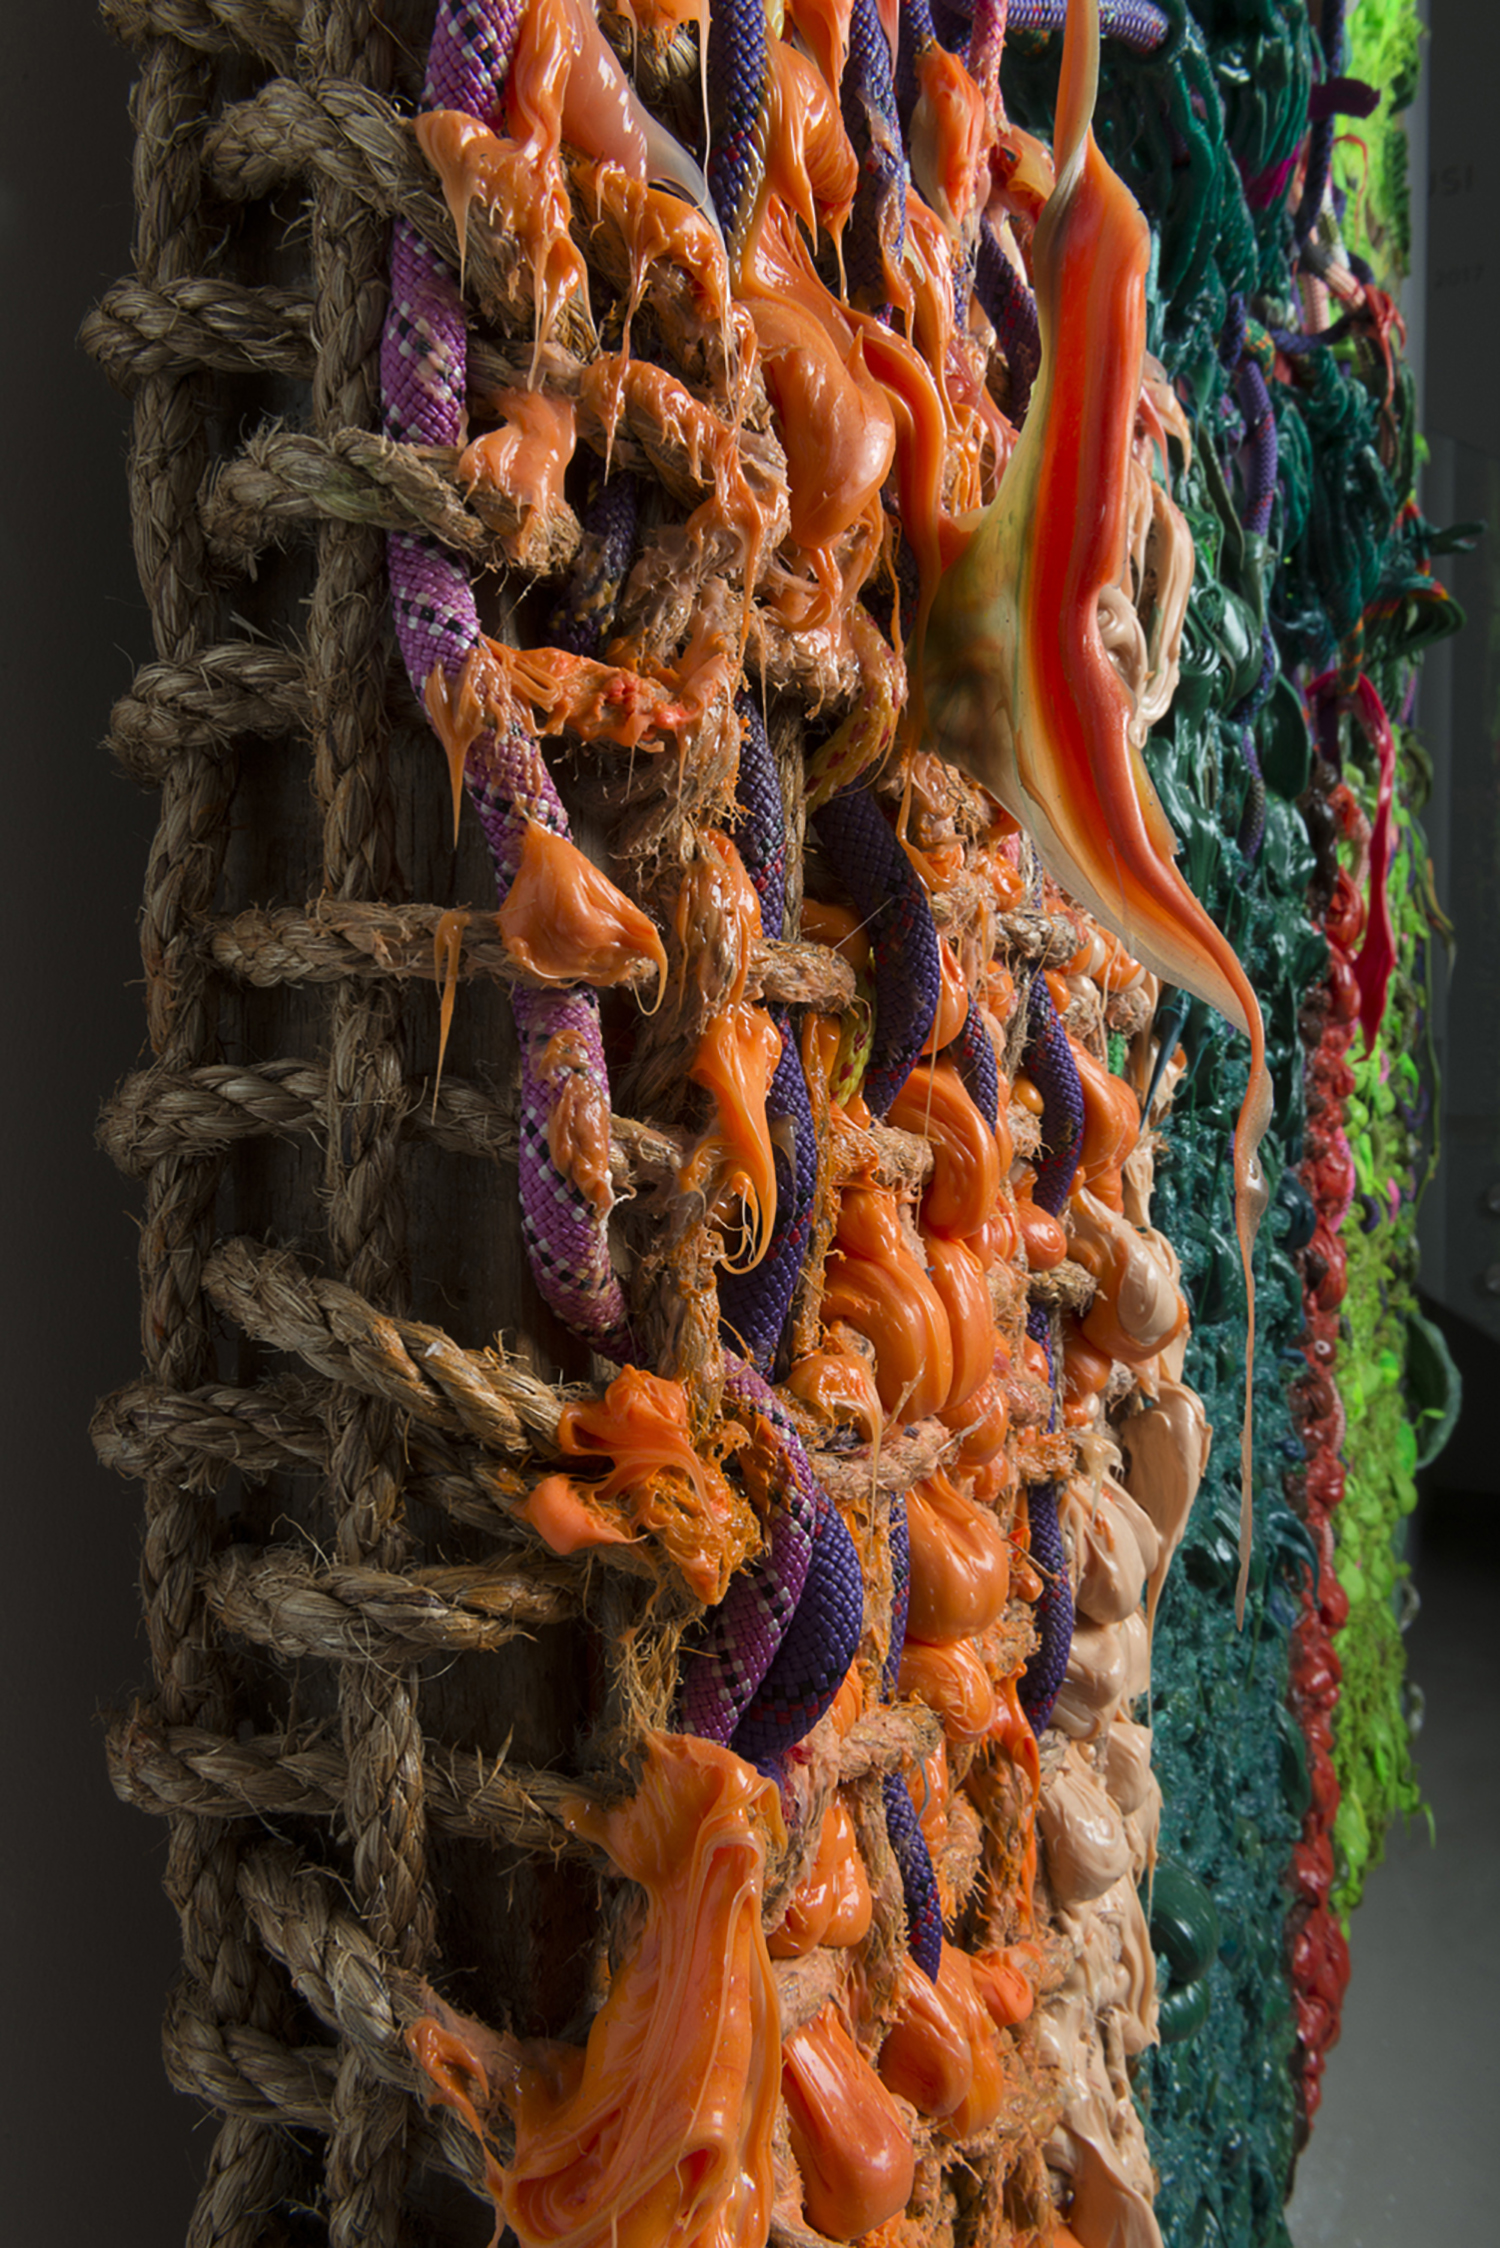  Re-accomodation Abstract Paintant, 2016, (detail)  190.5 x 157.48 x 20.32 cm | 75 x 62 x 8 in  Hand woven manilla rope, climbing rope, alkyd paint, silicone, wood, 3d printed plastic 